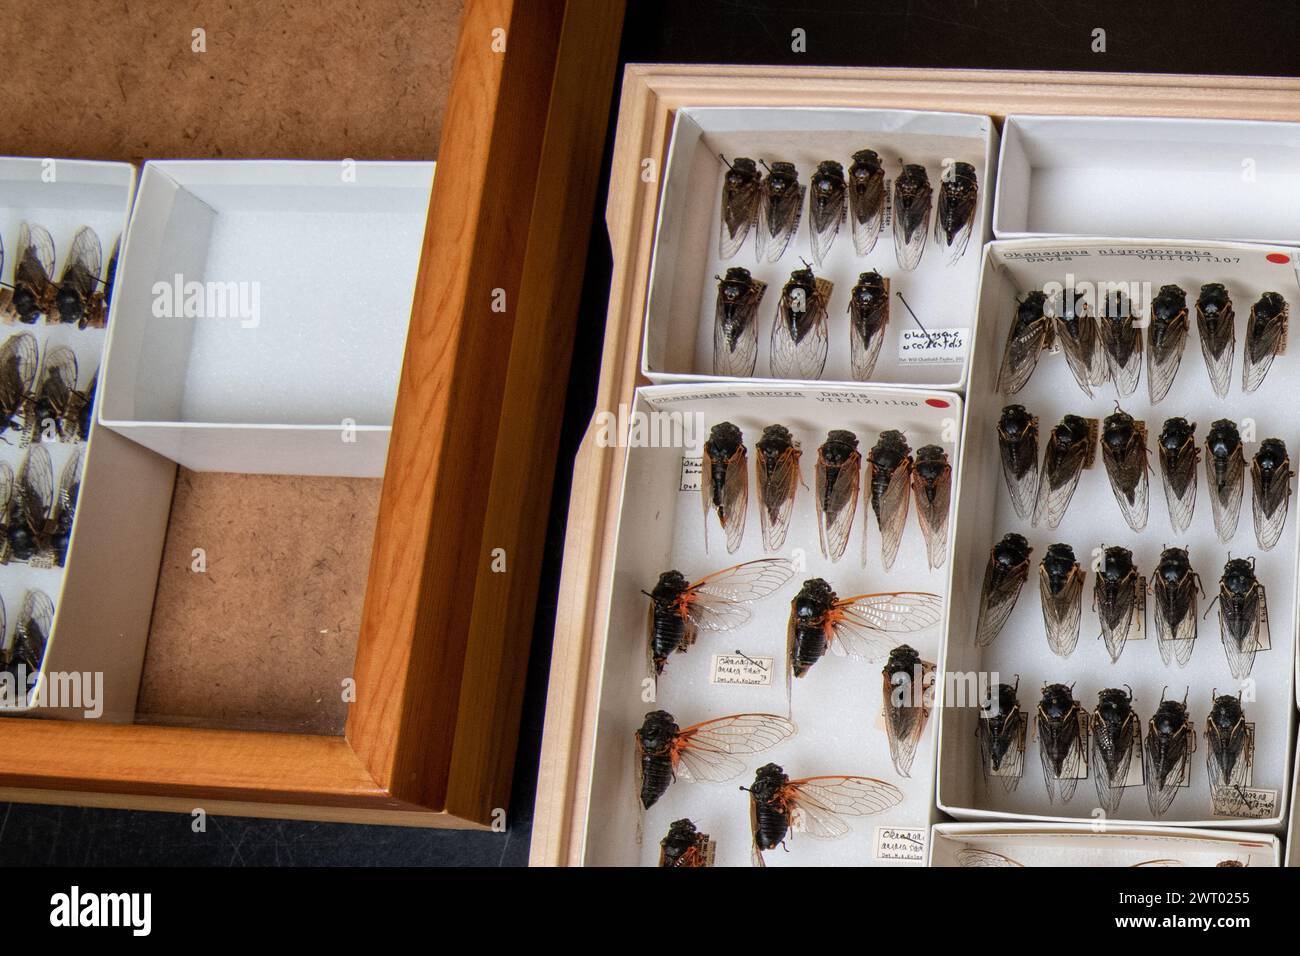 Many pinned cicadas in a museum case showing cicada diversity of North America. Many species of the insect are represented. Stock Photo